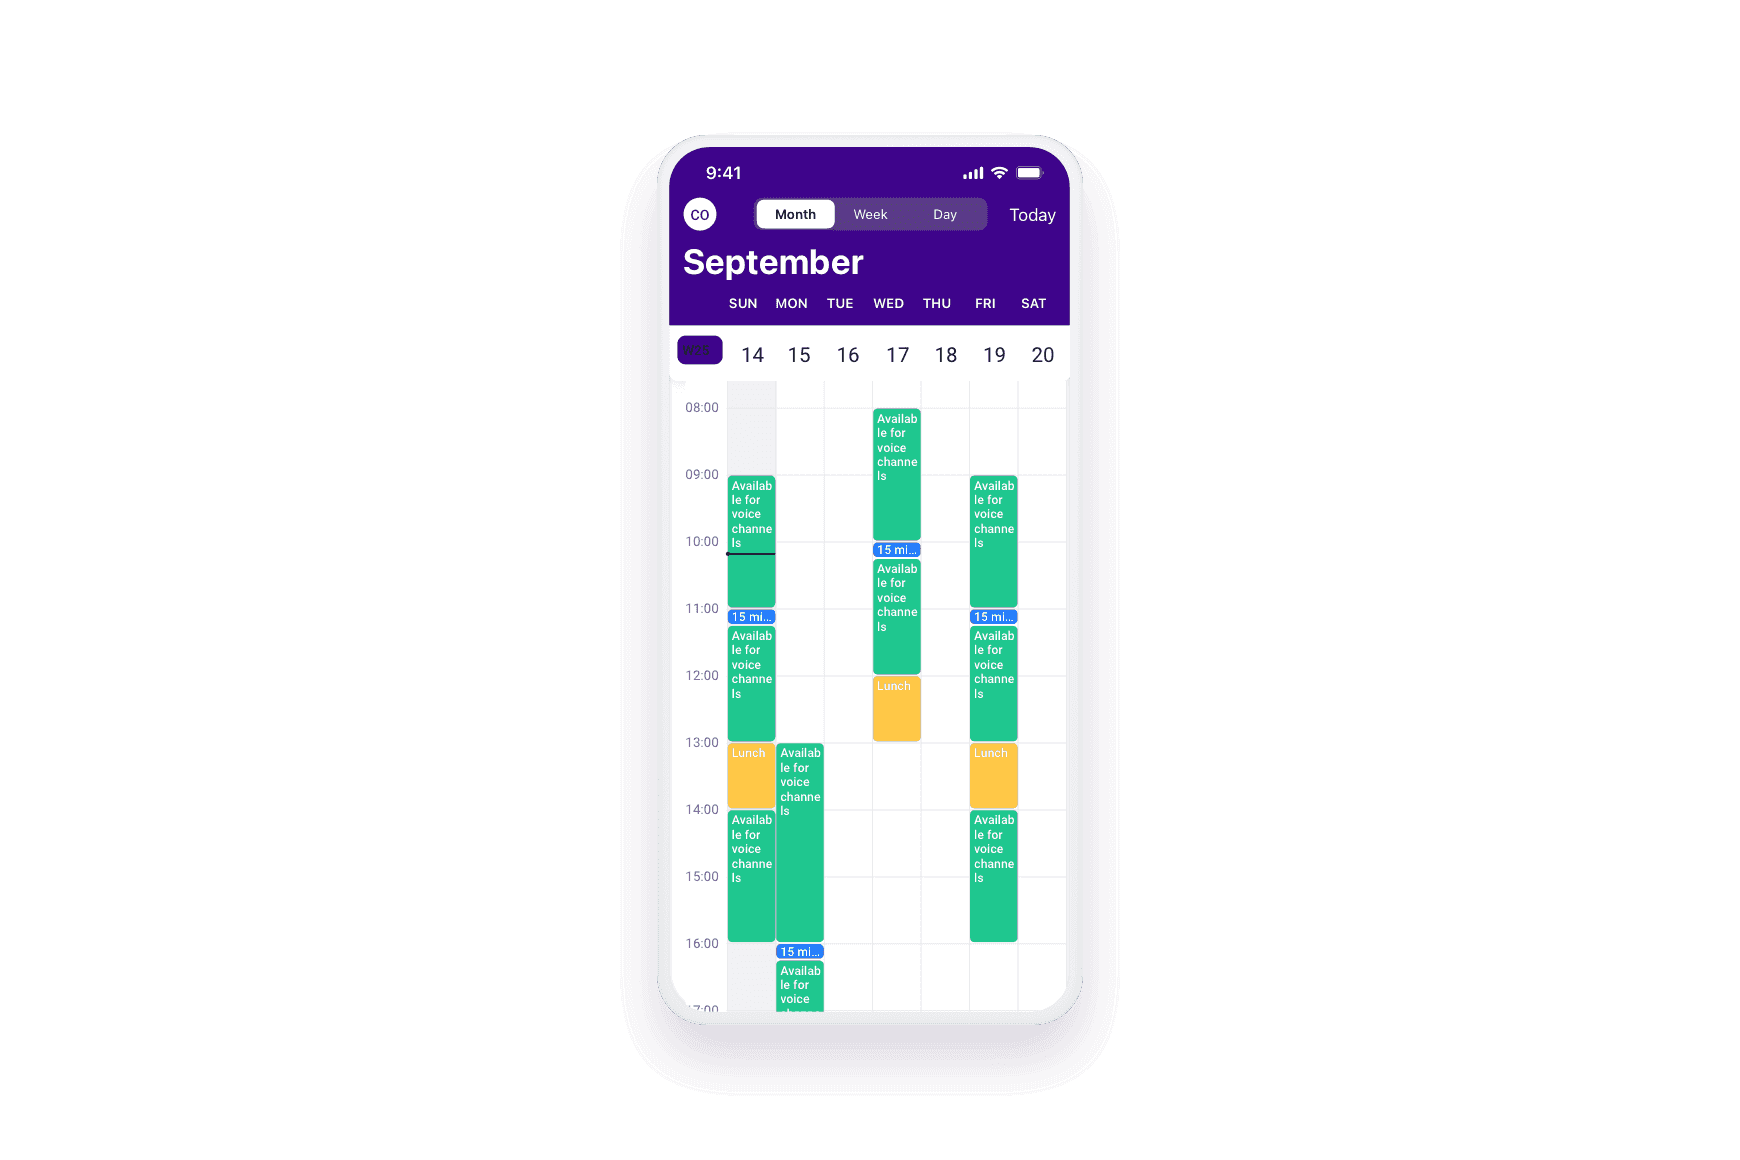 Mobile Workforce Flexible Scheduling Experience